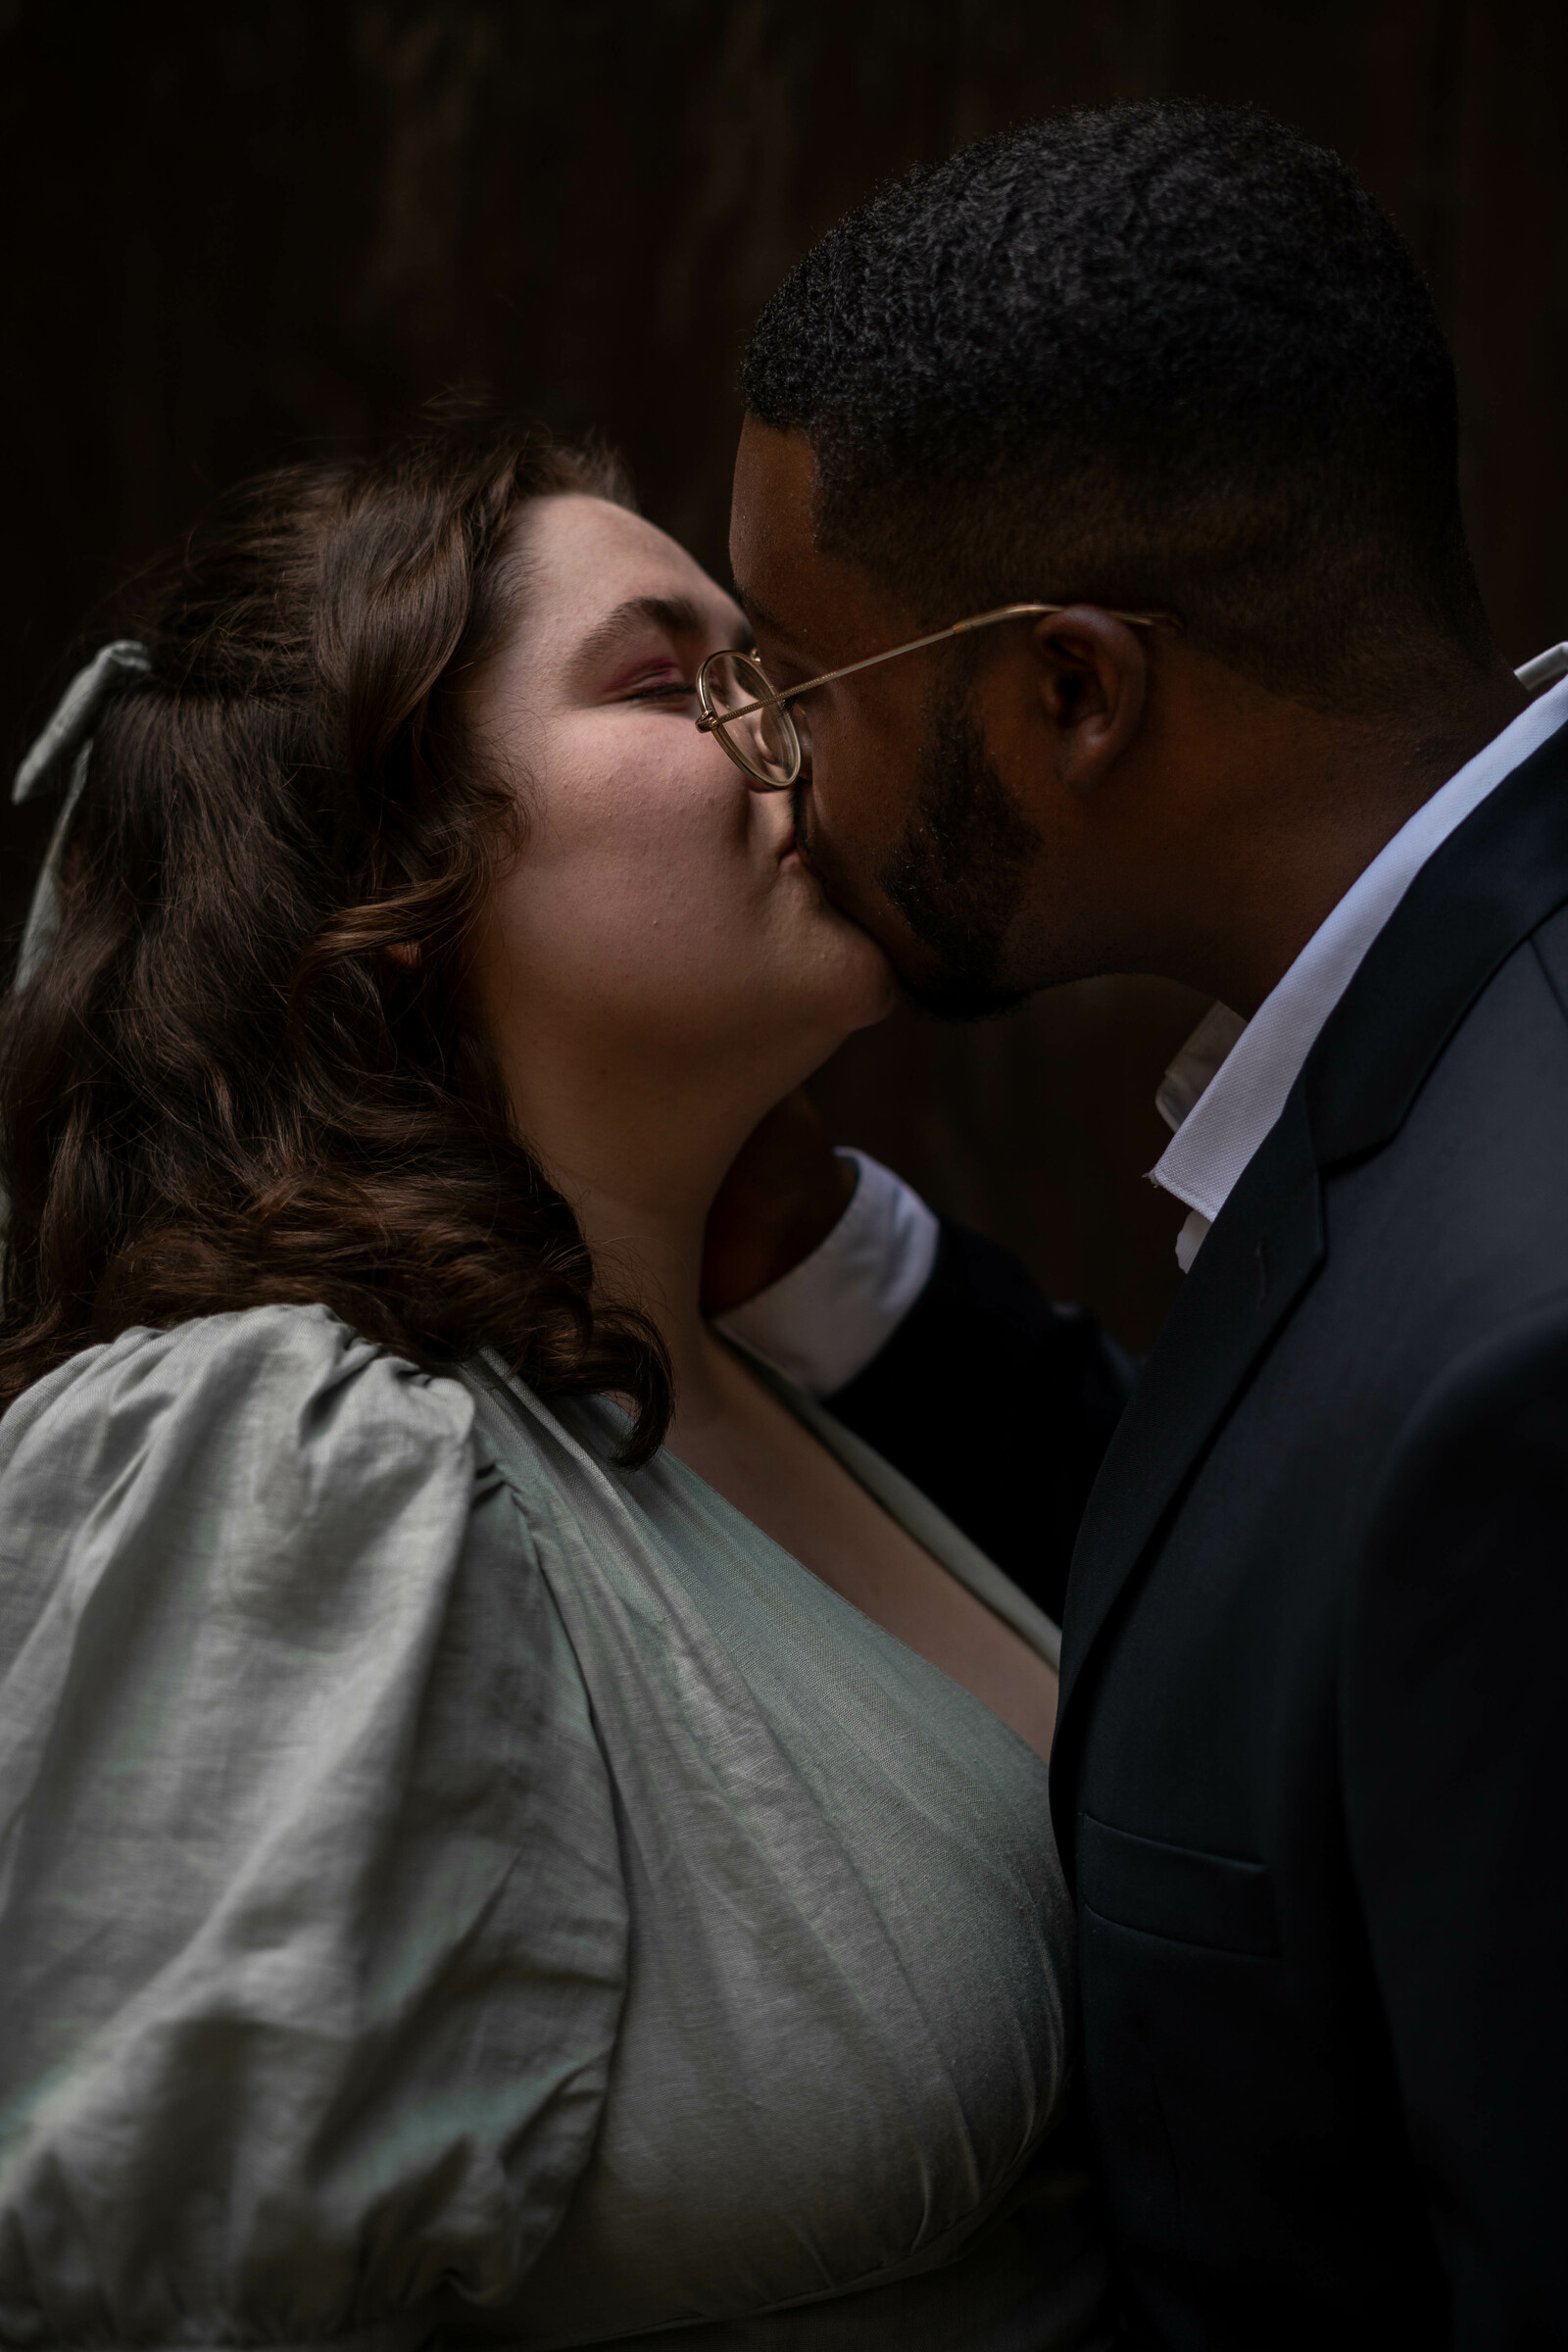 Jalen and Maria kiss after their wedding.